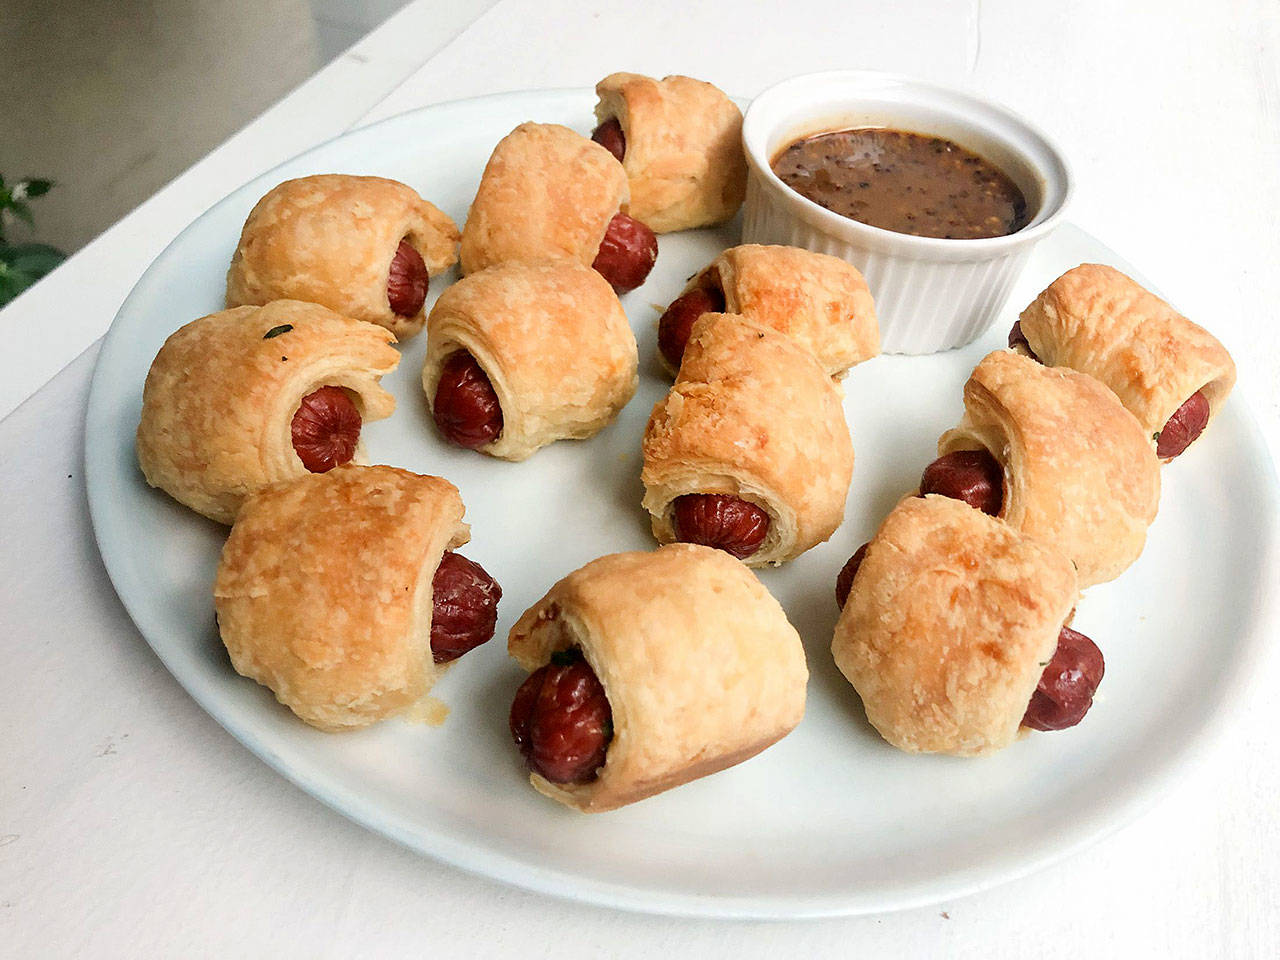 For these upscale pigs in a blanket, Chef Alex Guarnaschelli tucks chopped parsley into the pastry and adds tabasco and grainy mustard to the sauce. (Kate Krader / Bloomberg)